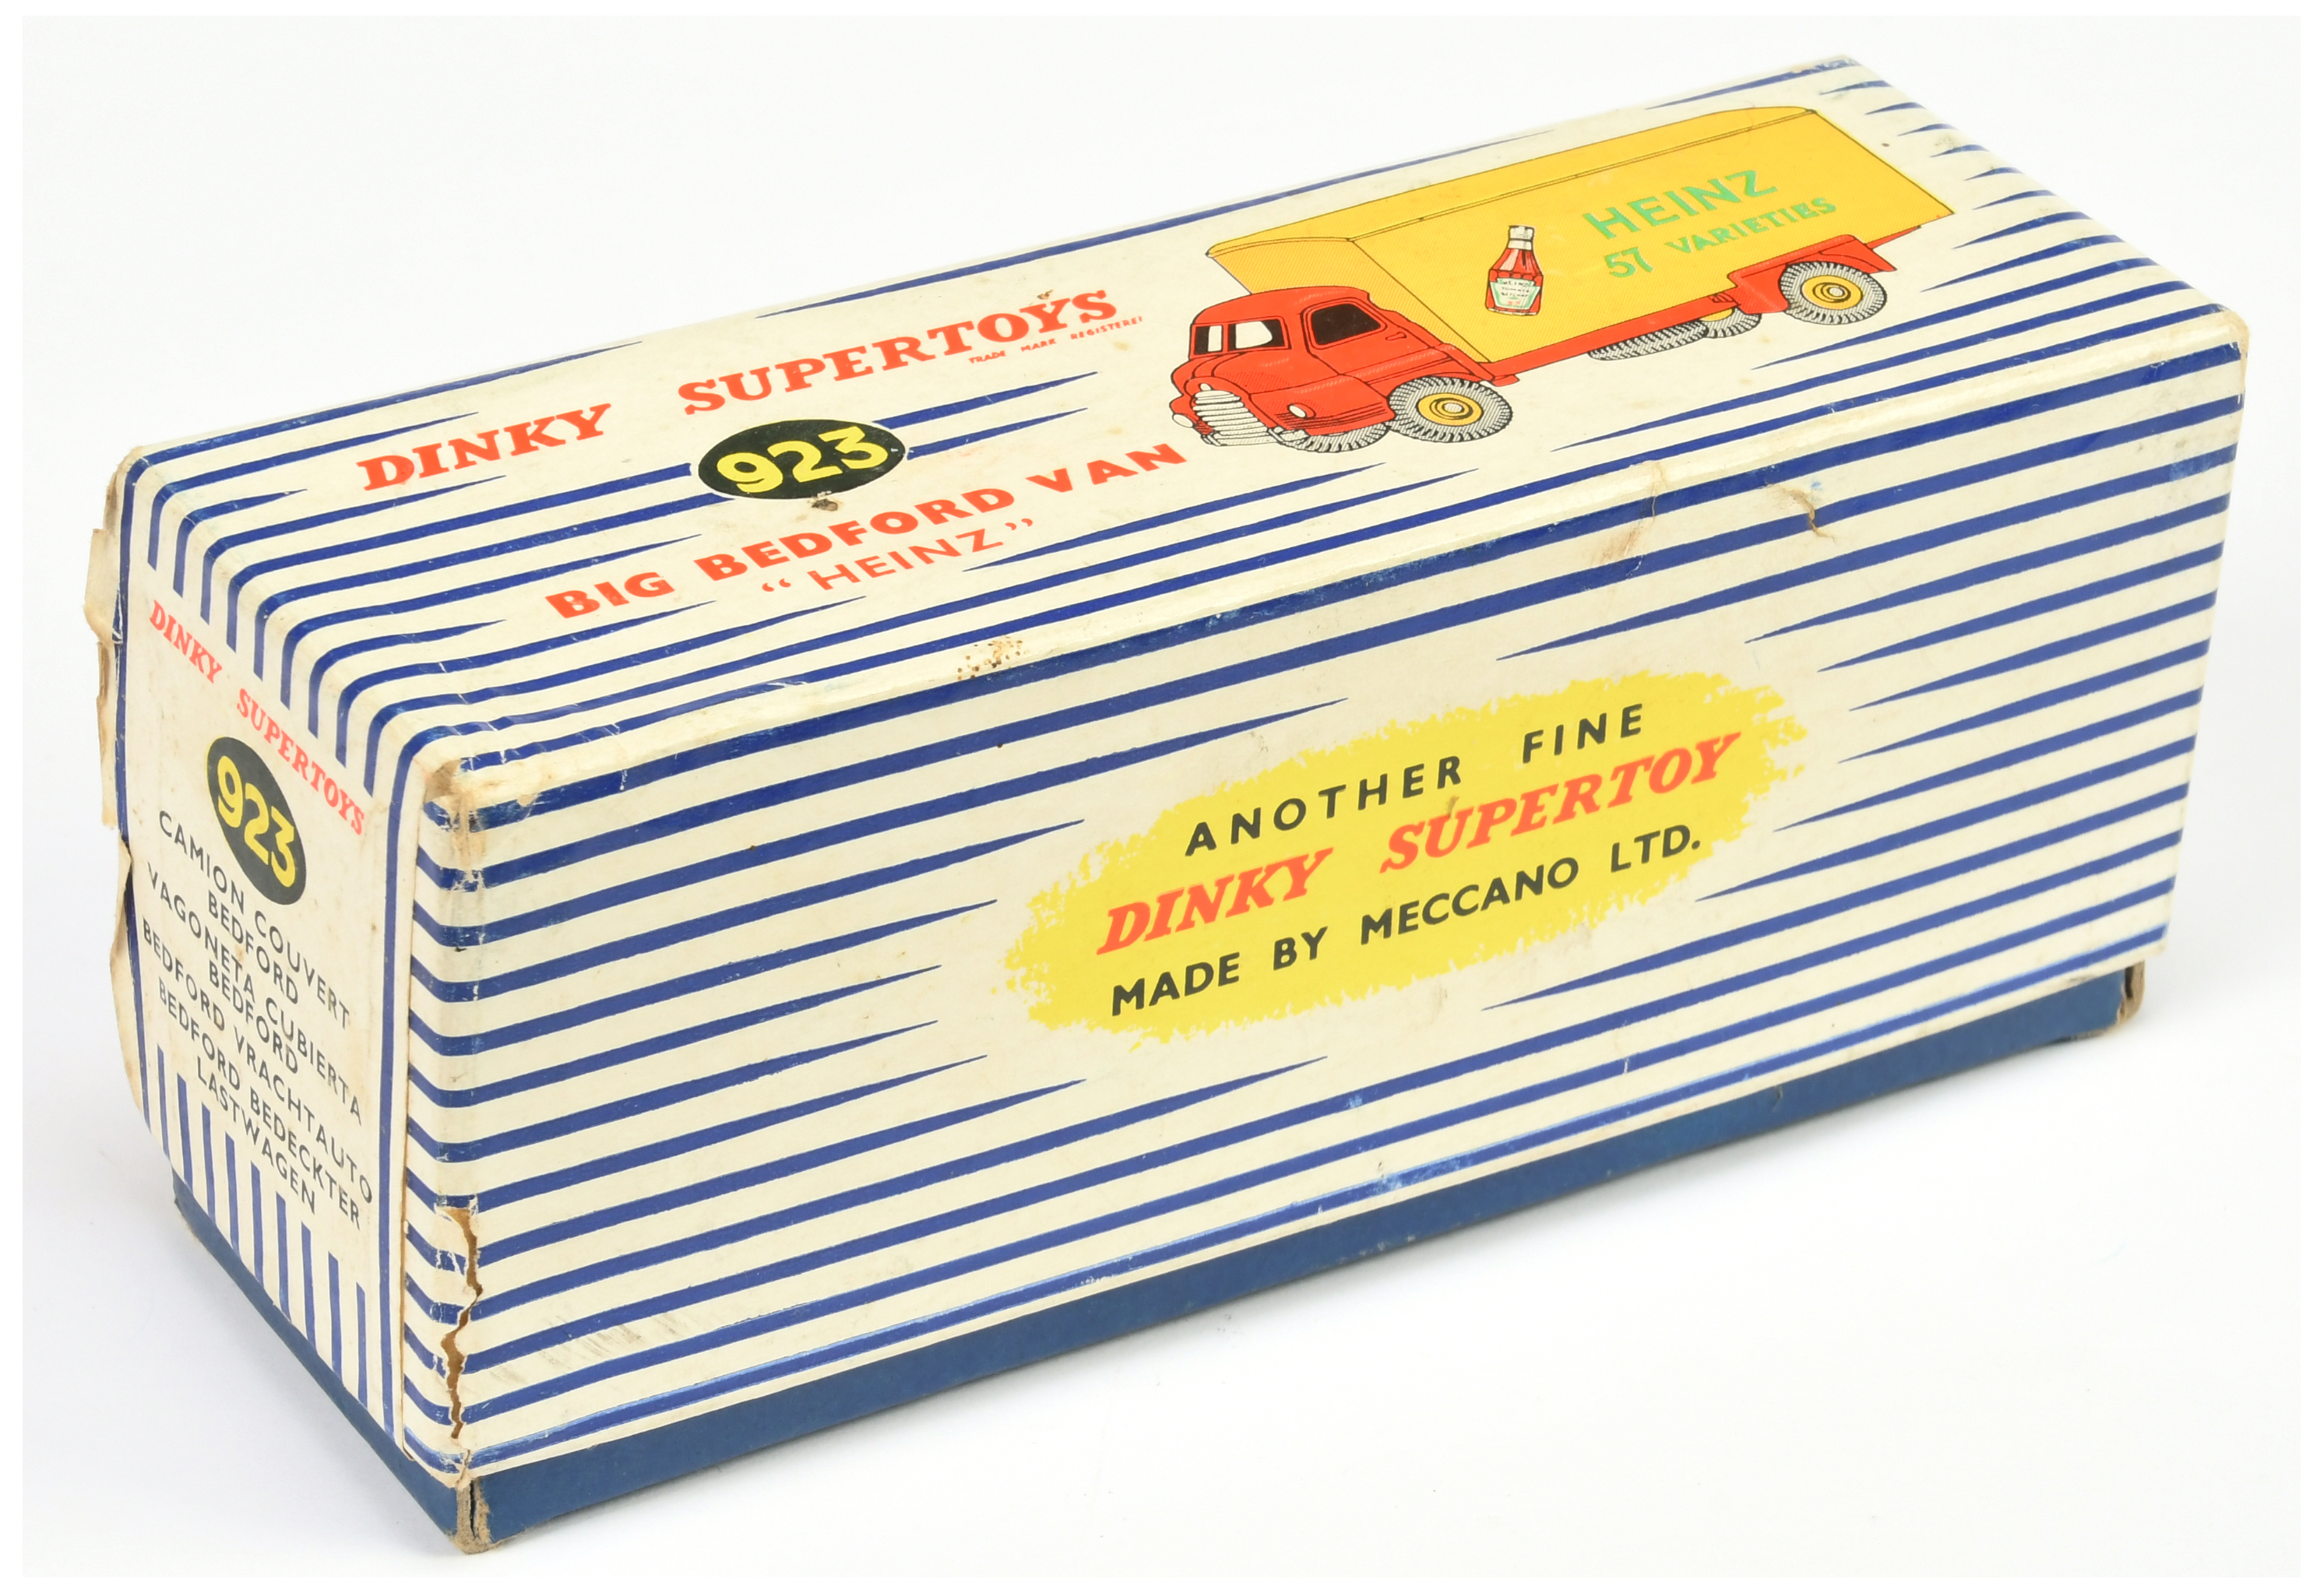 Dinky Toys Empty box - 923 Big Bedford "Heinz 57 Varieties" - Blue and white striped lift off lid...